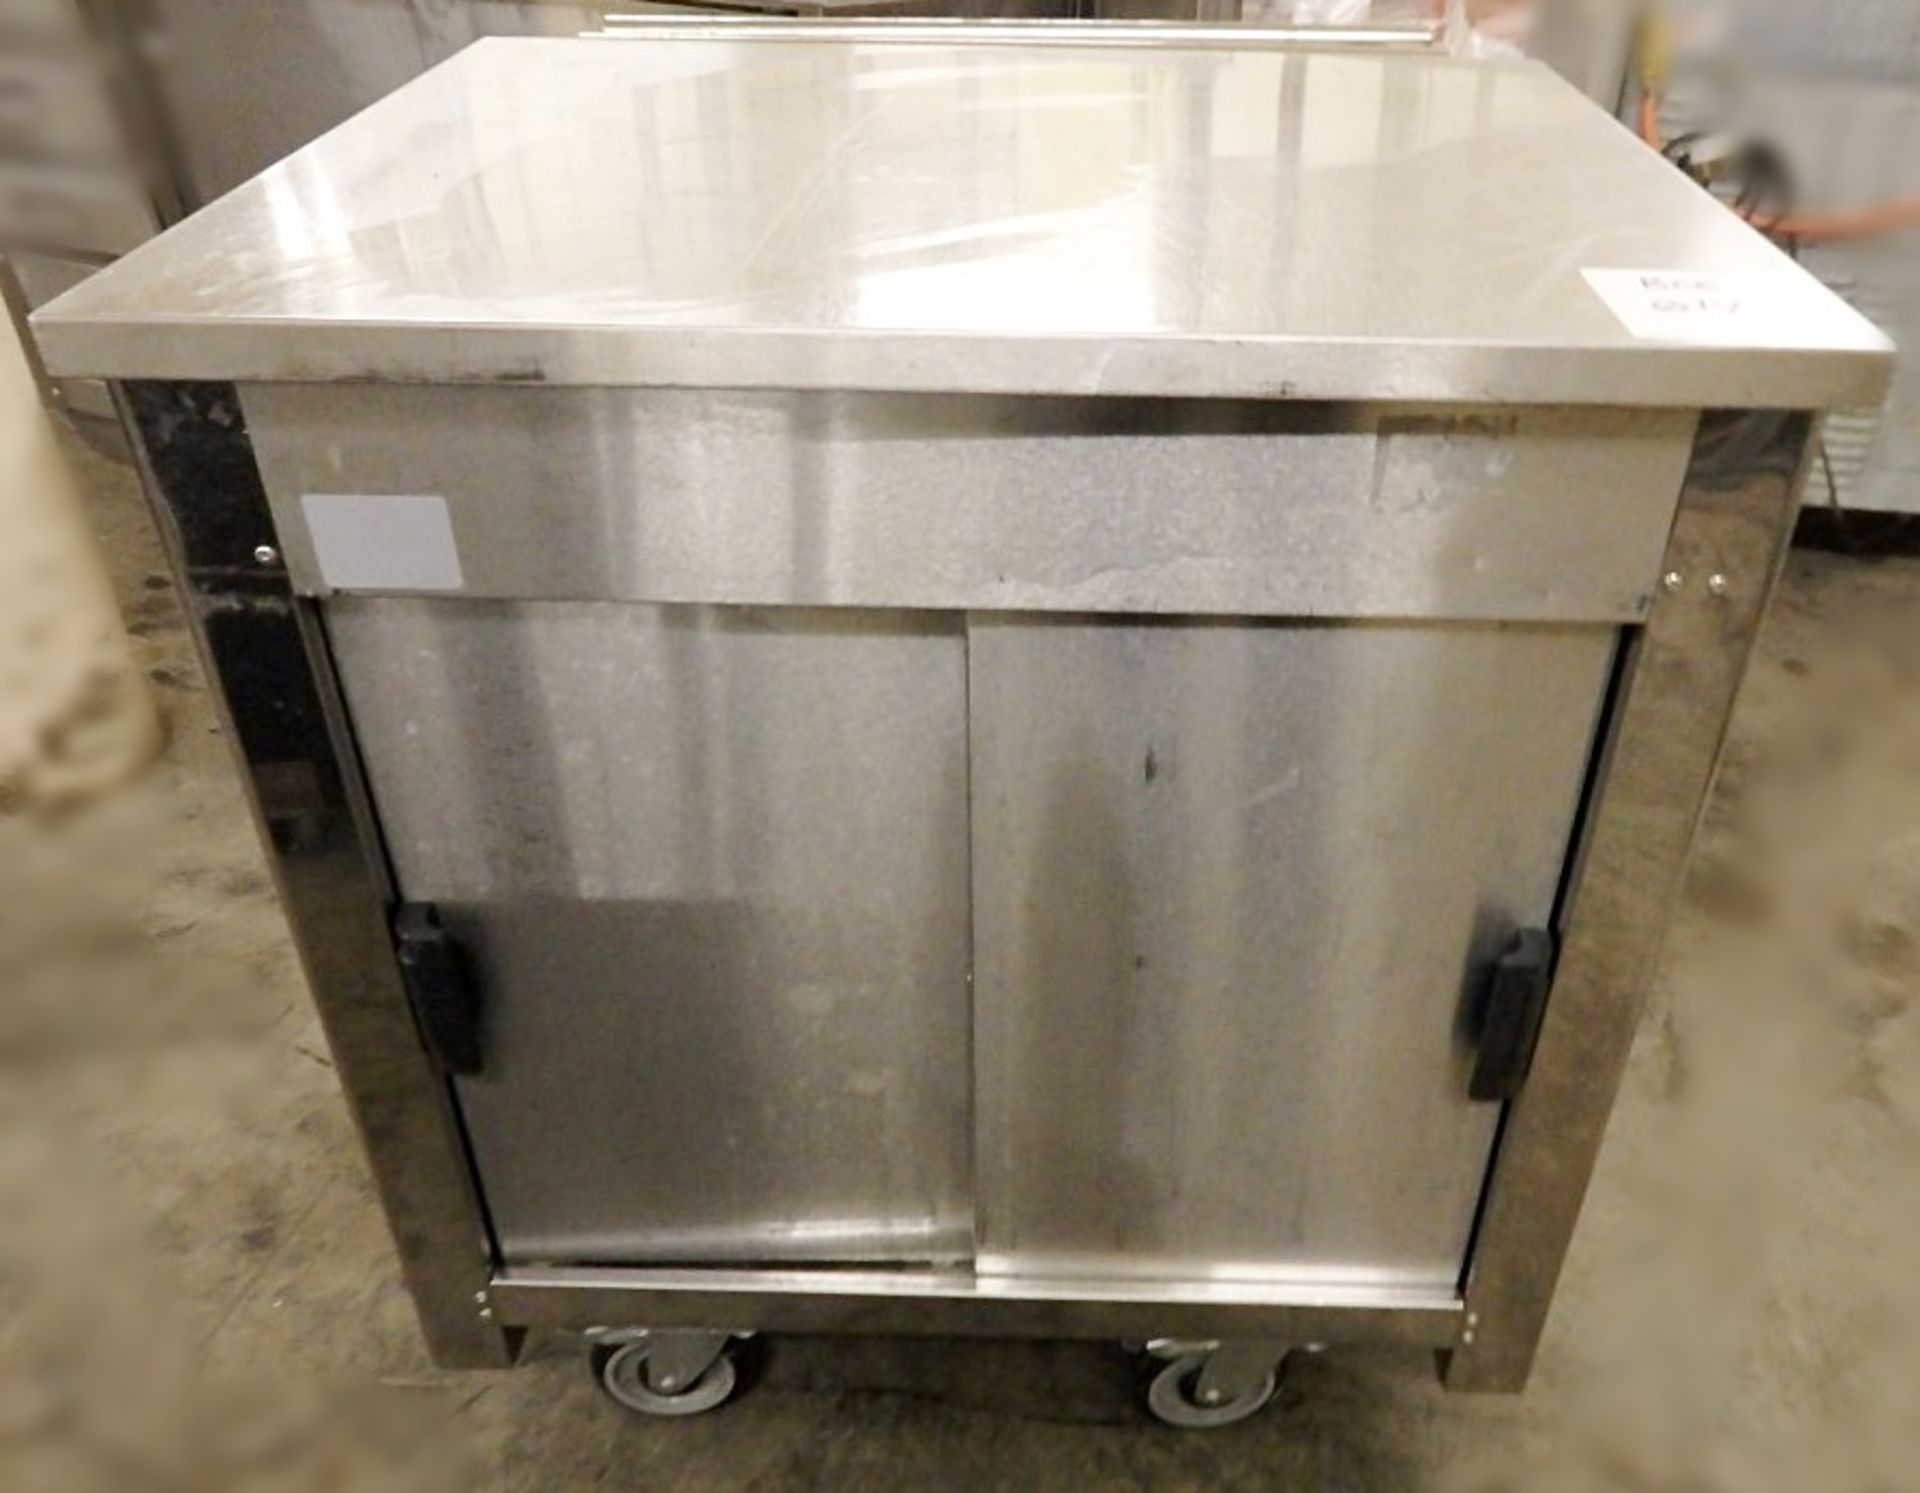 1 x Serving Counter With Storage - On Castors For Maneuverability - Ideal For Pub Carvery, Canteens, - Image 8 of 8